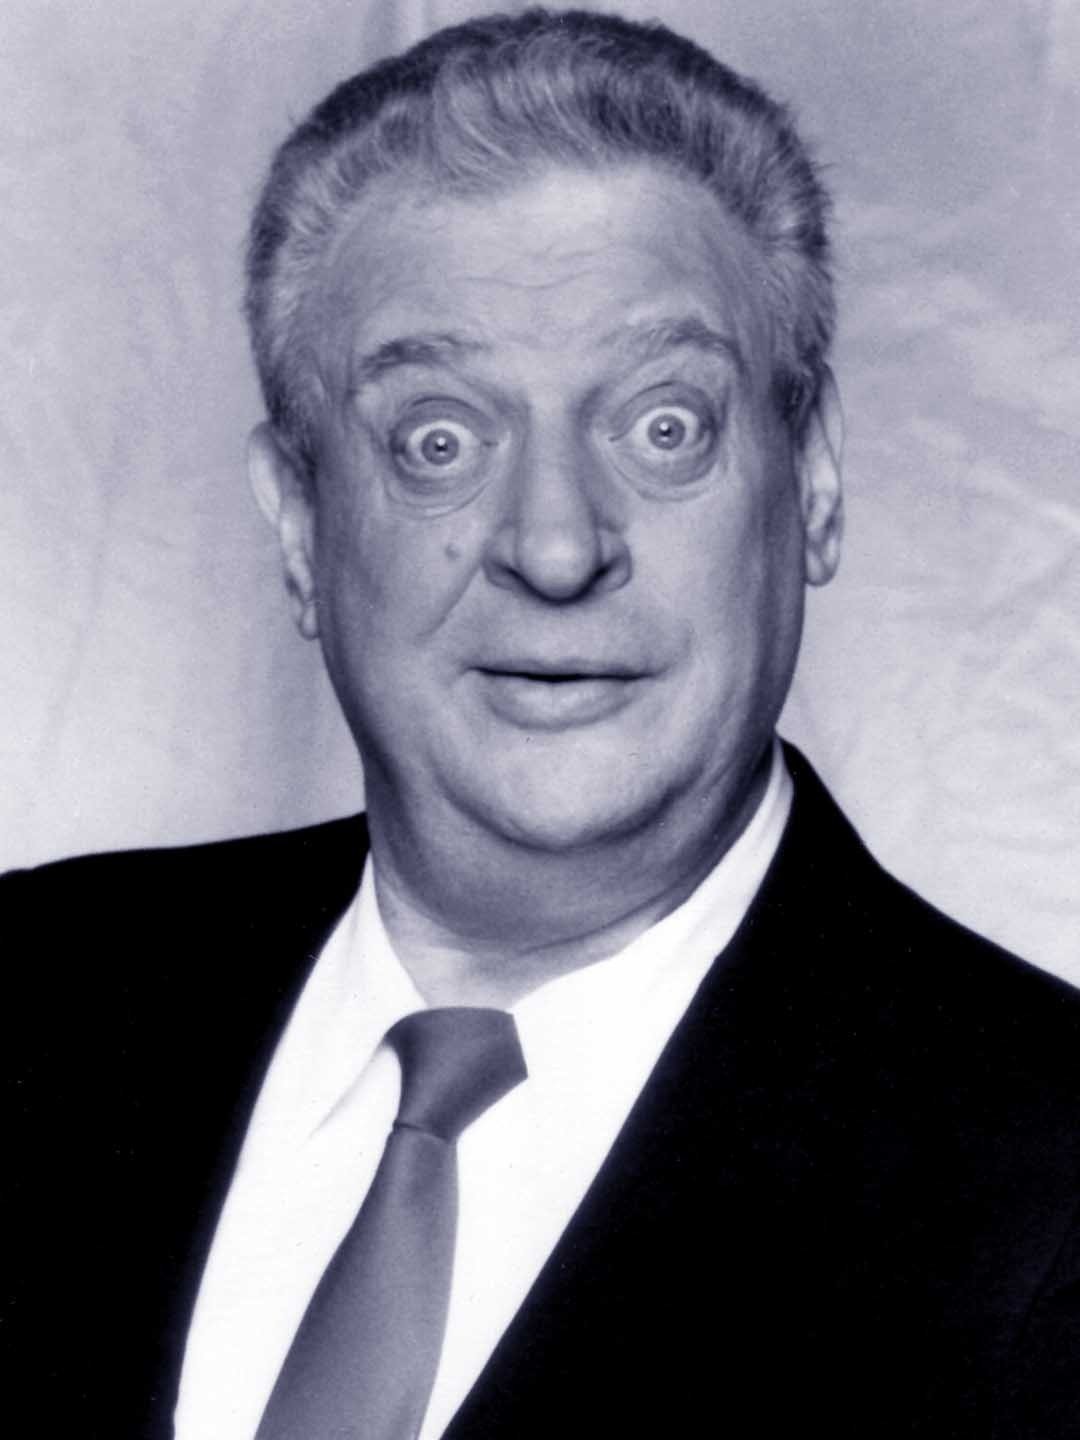 Rodney Dangerfield - United States, Professional Profile